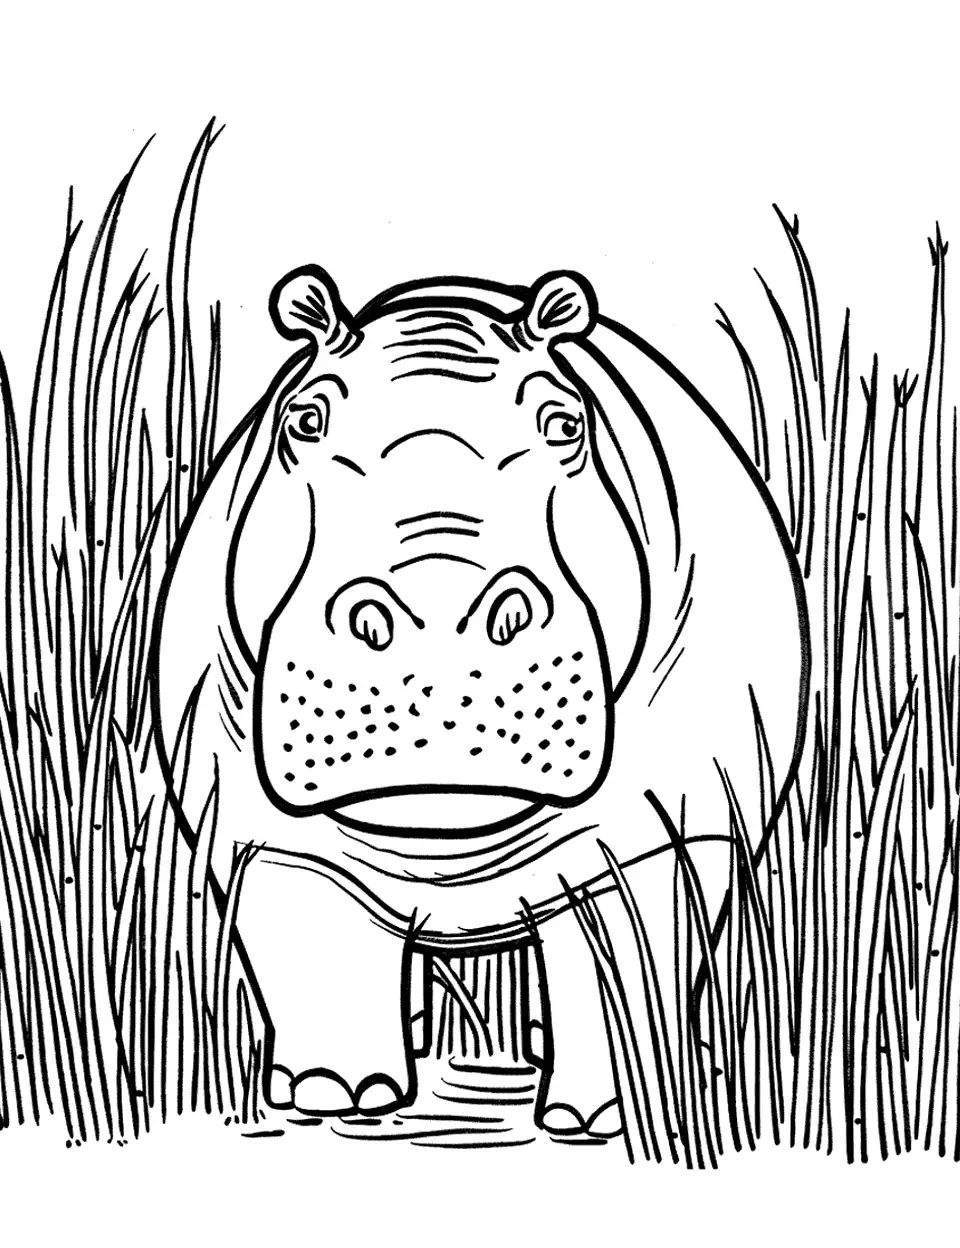 Hippo Safari Adventure Coloring Page - A hippo exploring the wilderness of the safari, surrounded by tall grass.